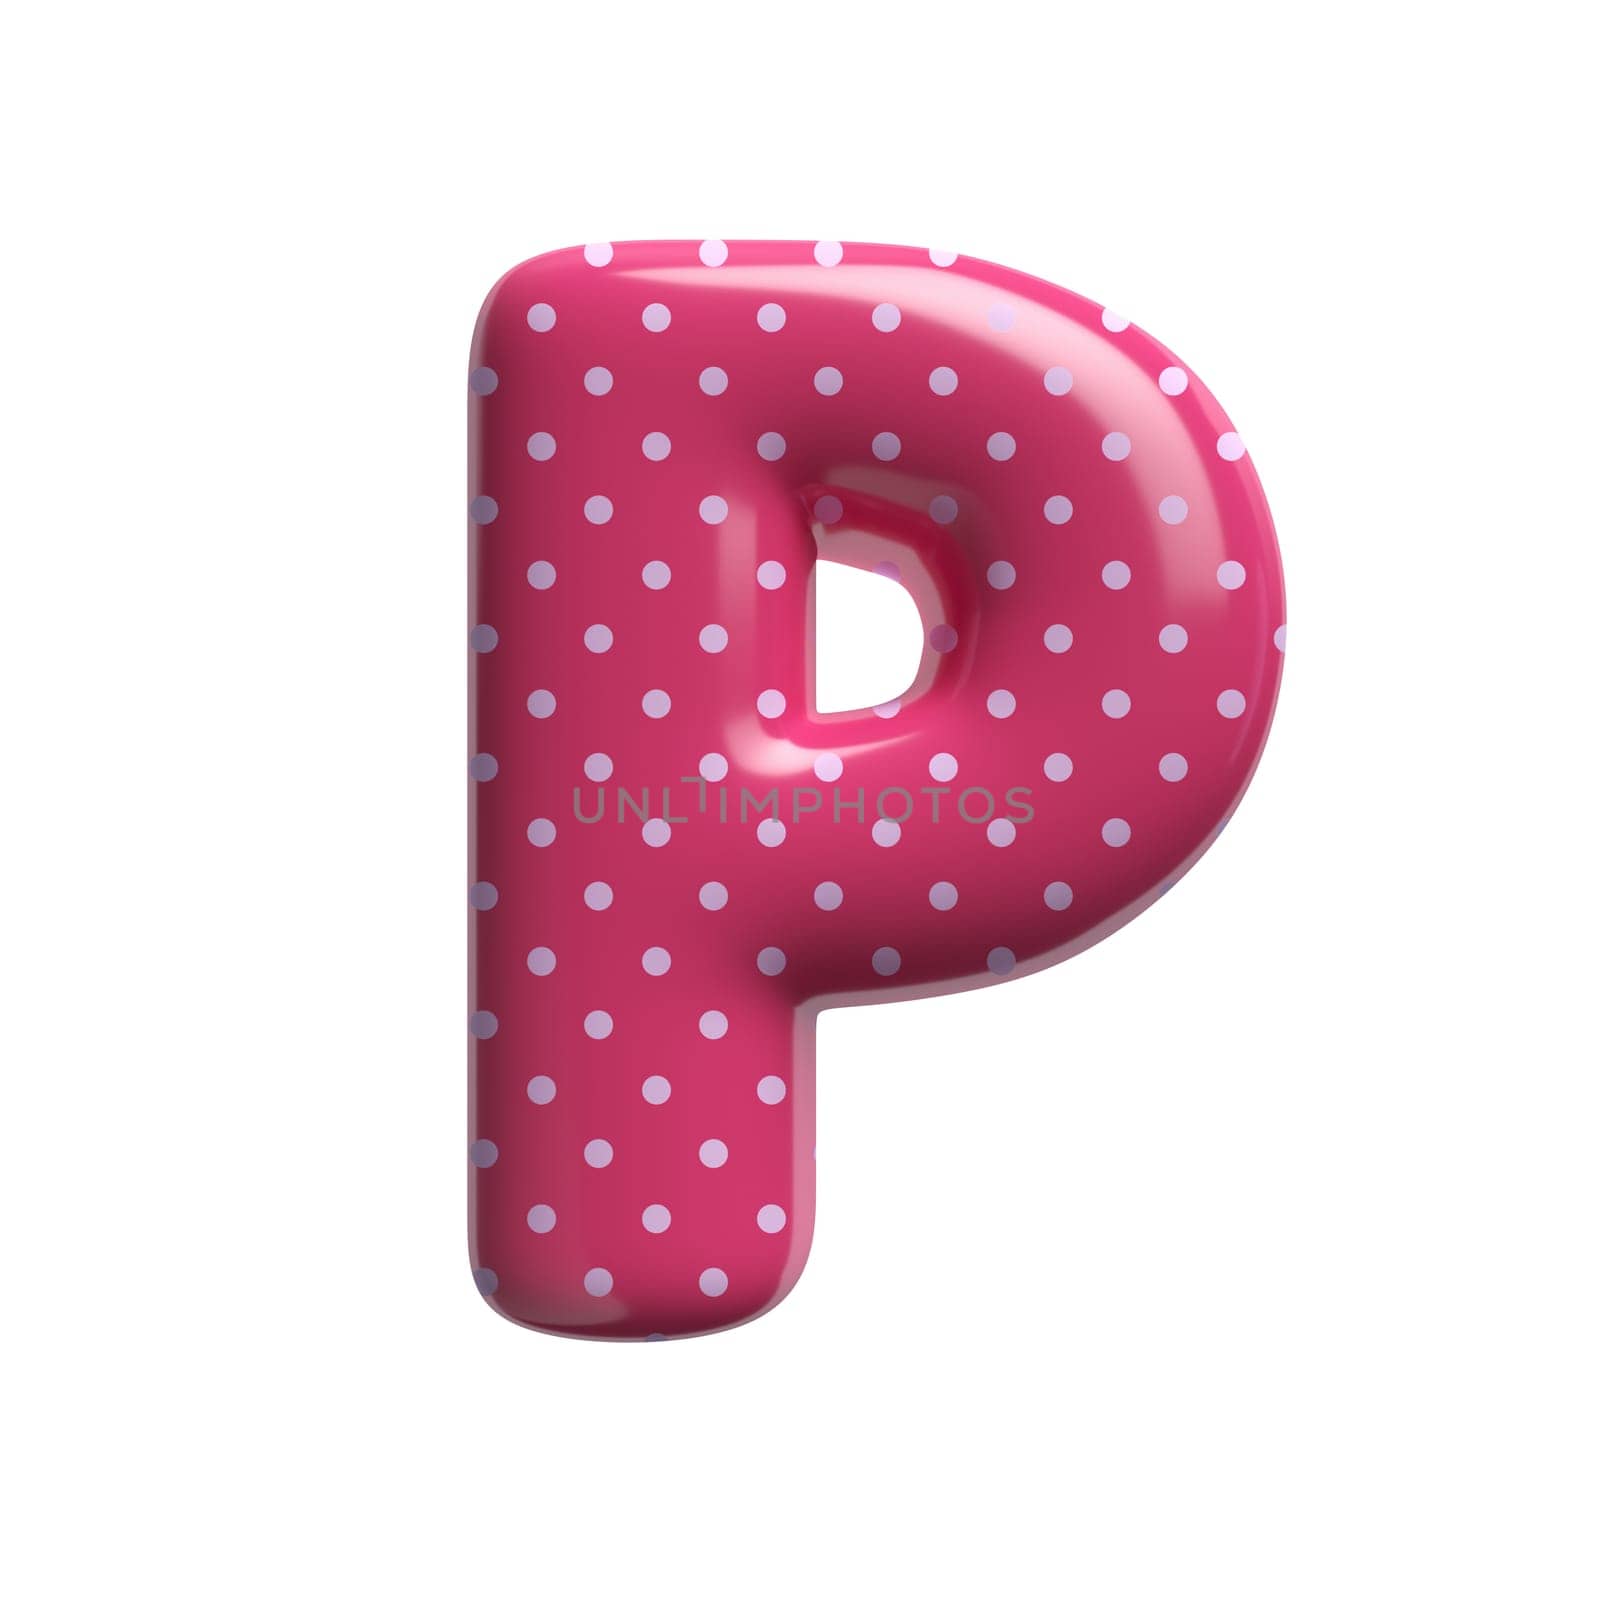 Polka dot letter P - Upper-case 3d pink retro font - suitable for Fashion, retro design or decoration related subjects by chrisroll